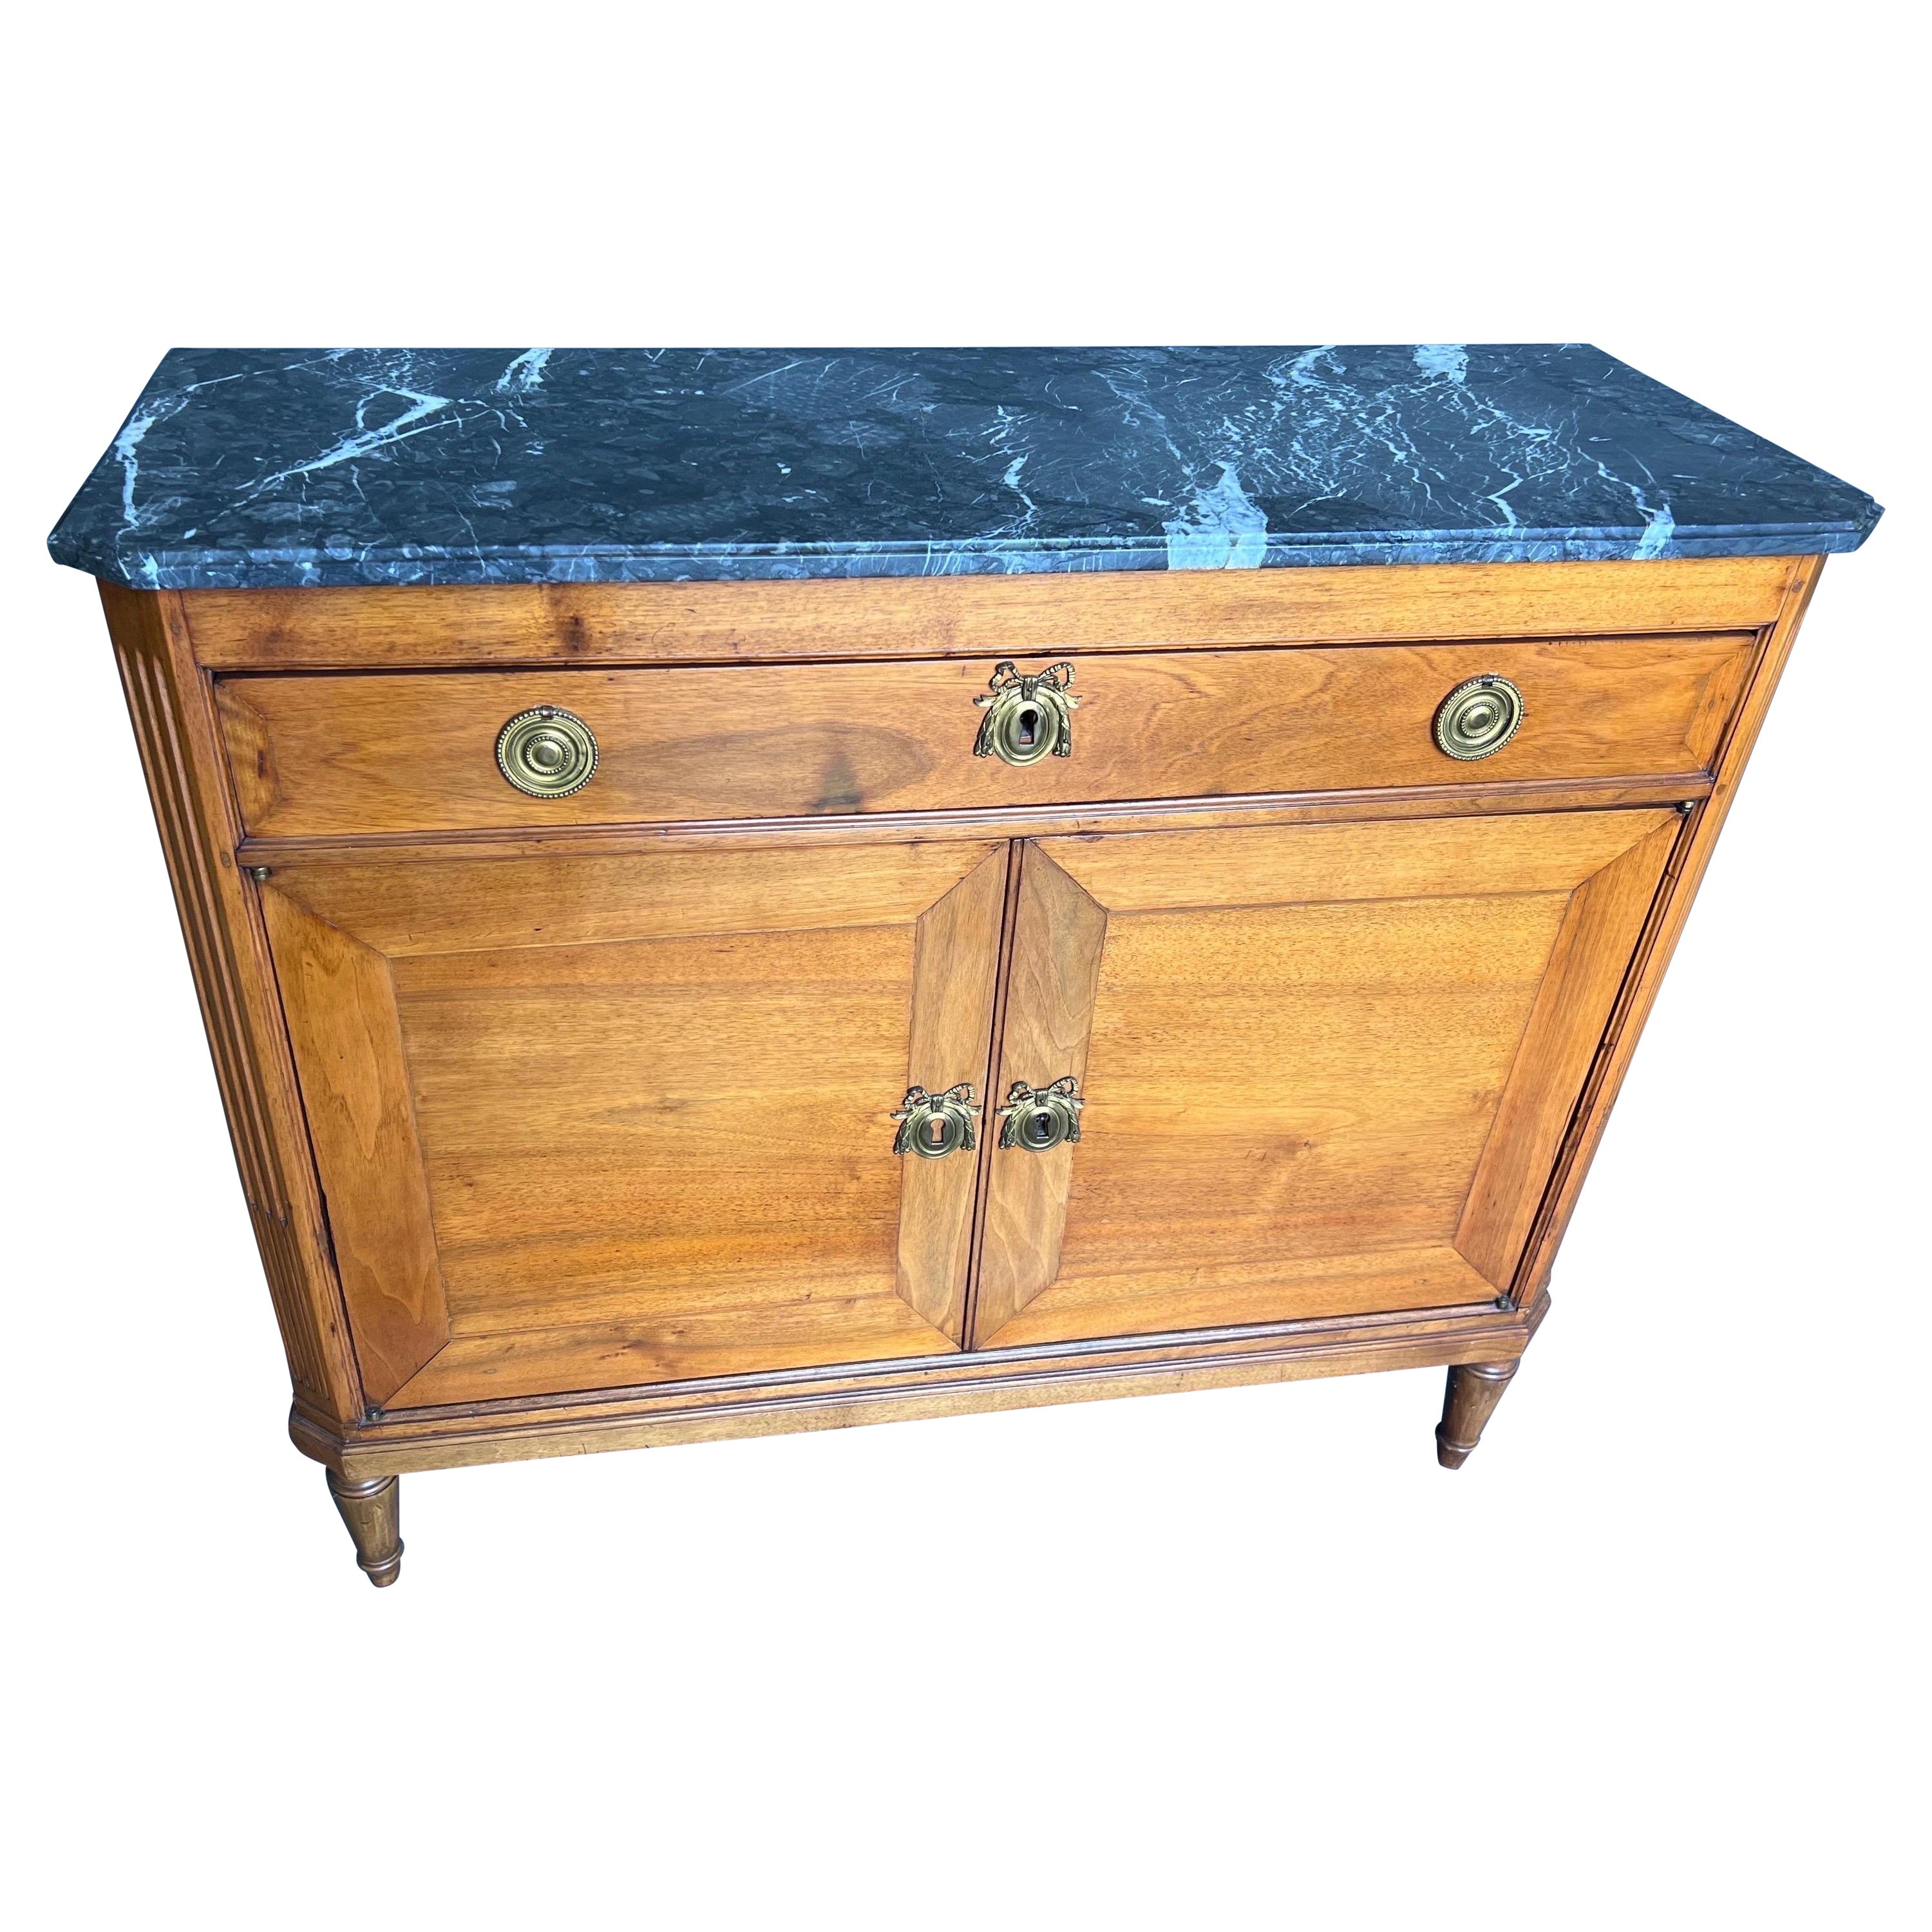 Early 19th Century French or Baltic Neoclassical Marble Top Cabinet For Sale